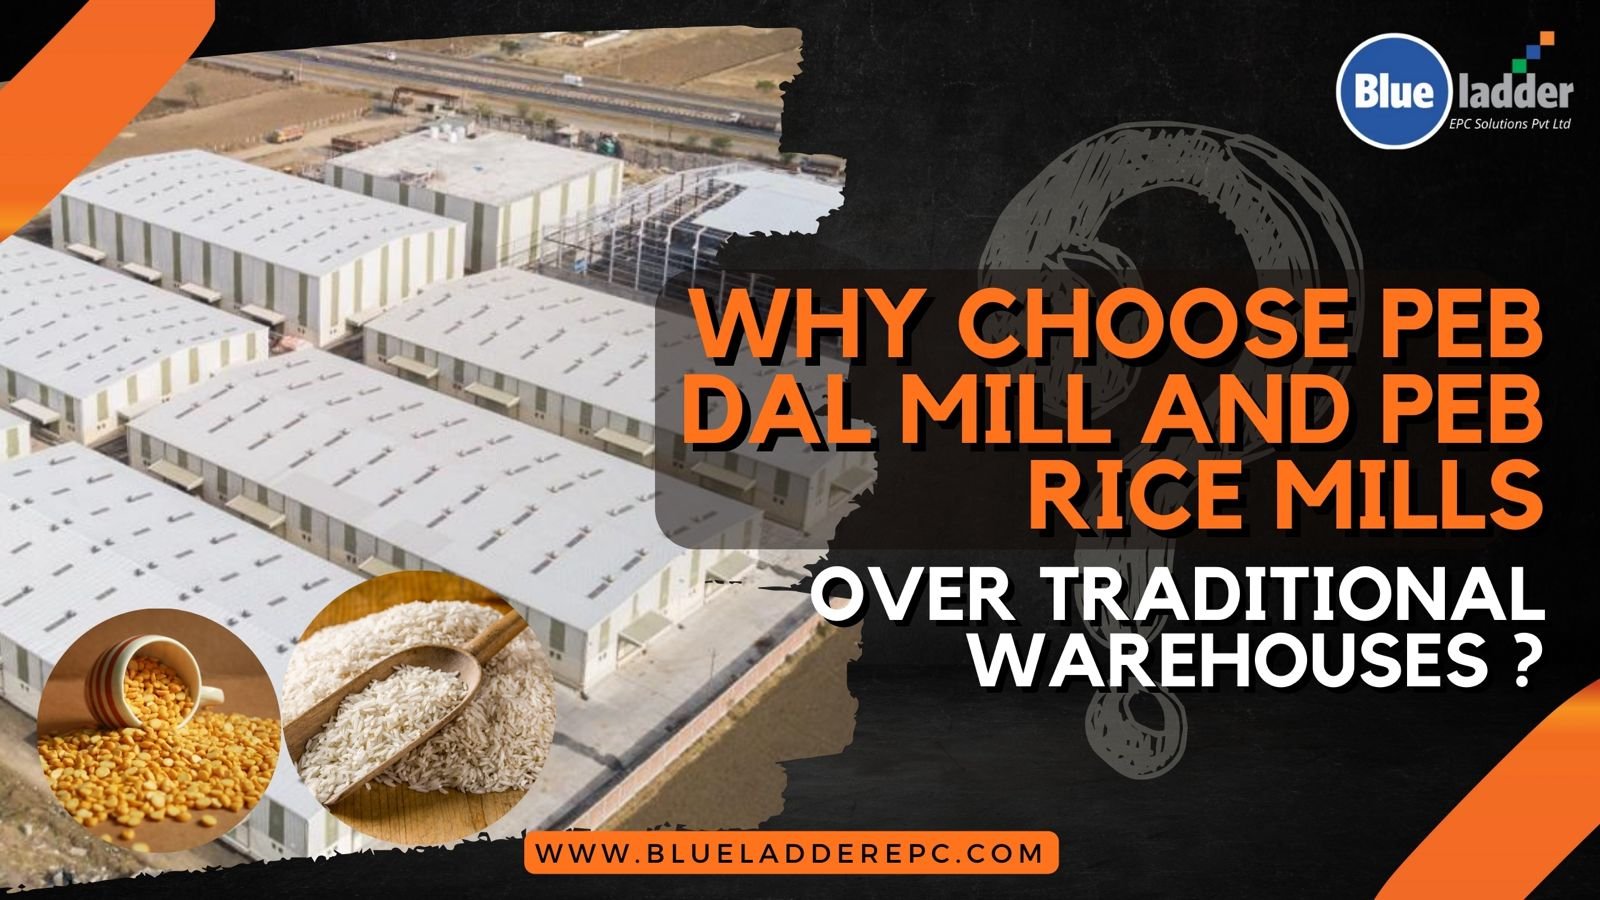 Choose Blueladder for state-of-the-art PEB Dal Mill and PEB Rice Mill structures.